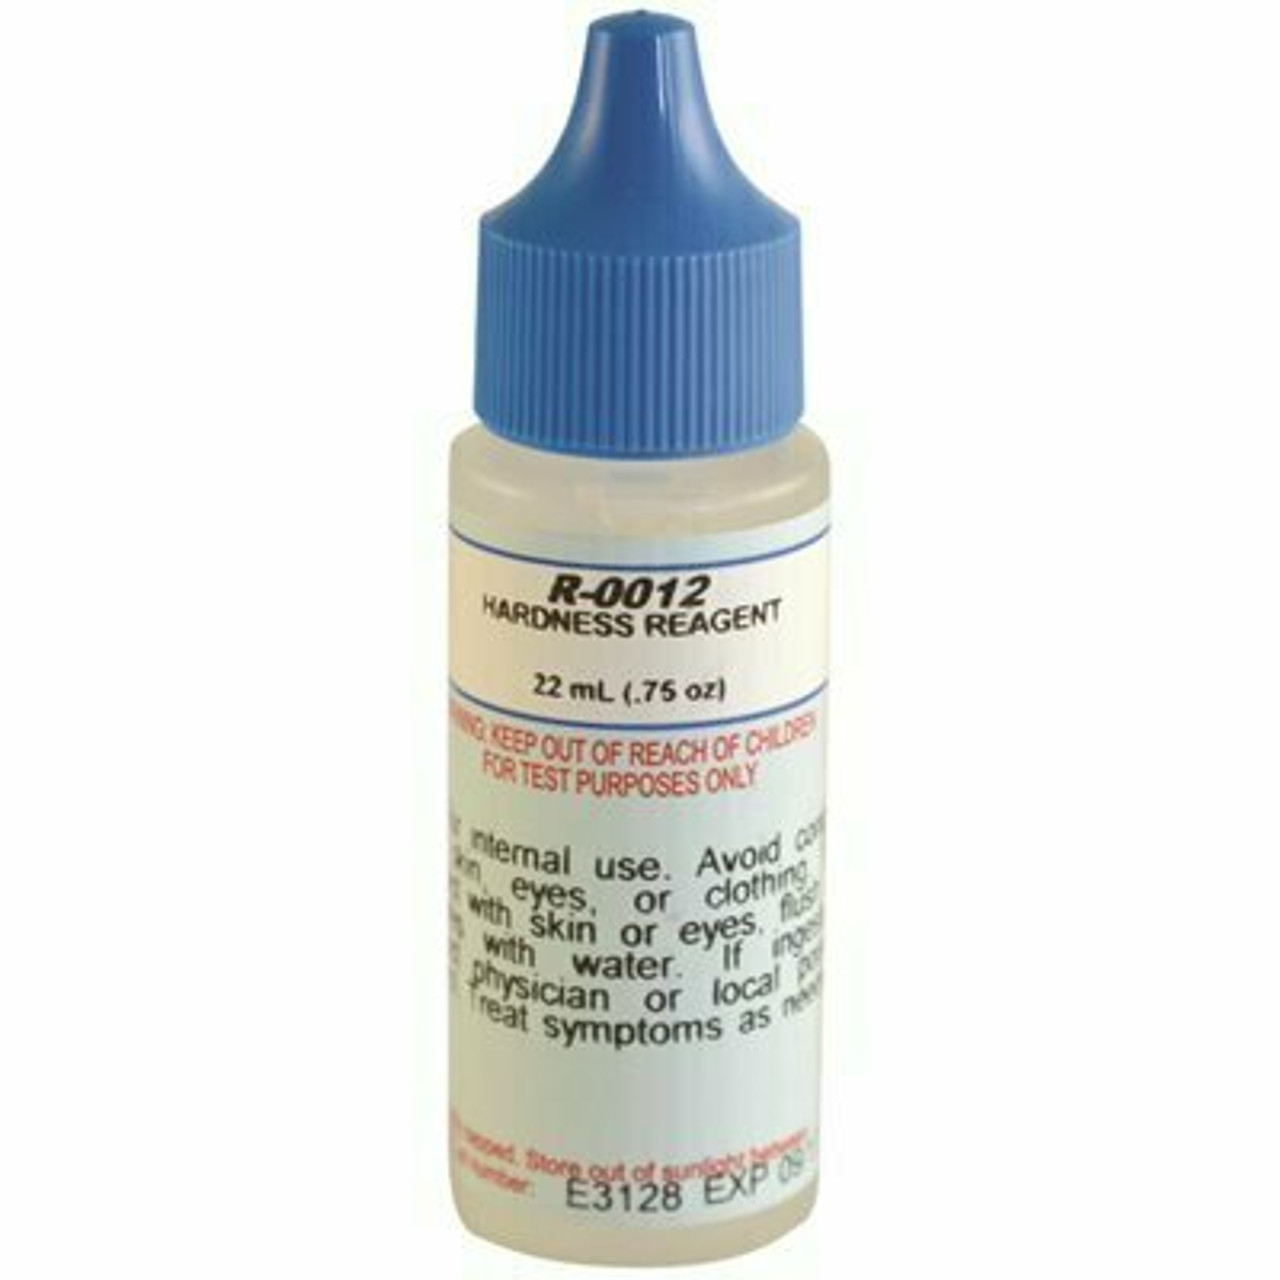 Taylor 3/4 Oz. Test Kit Replacement Reagent Refill Bottles Hardness Reagent